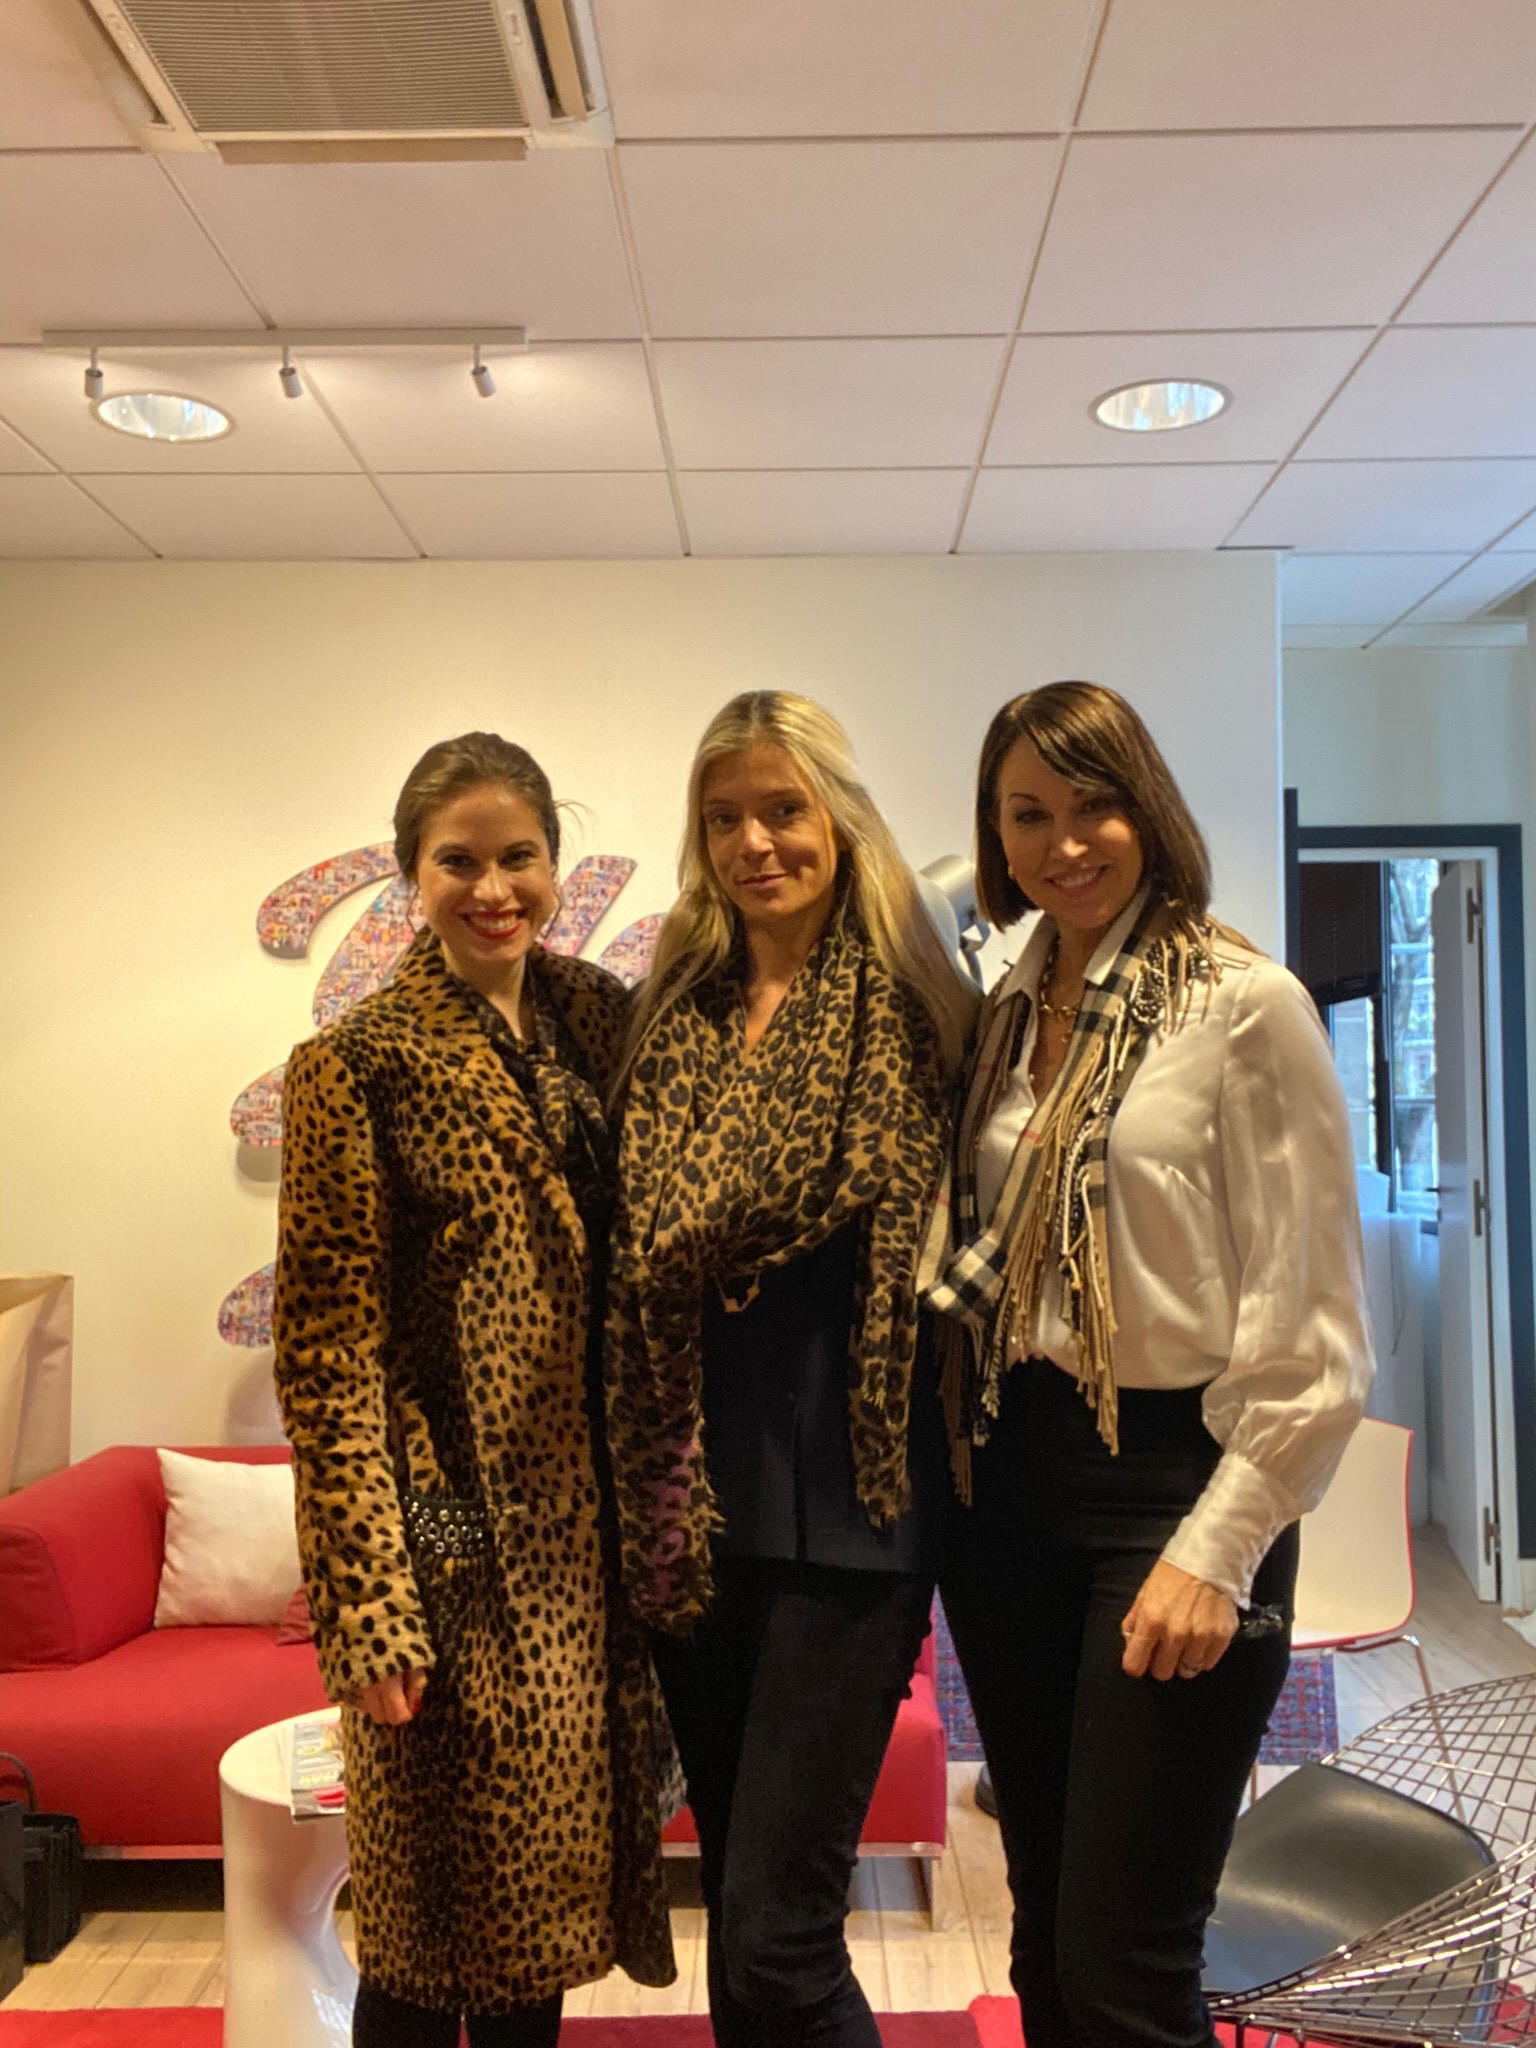 Three women standing together smiling: two with brown hair & one with blonde. One wears a leopard print coat, another wears a leopard print scarf & jeans and the last wears a burberry scarf with an ivory silk blouse